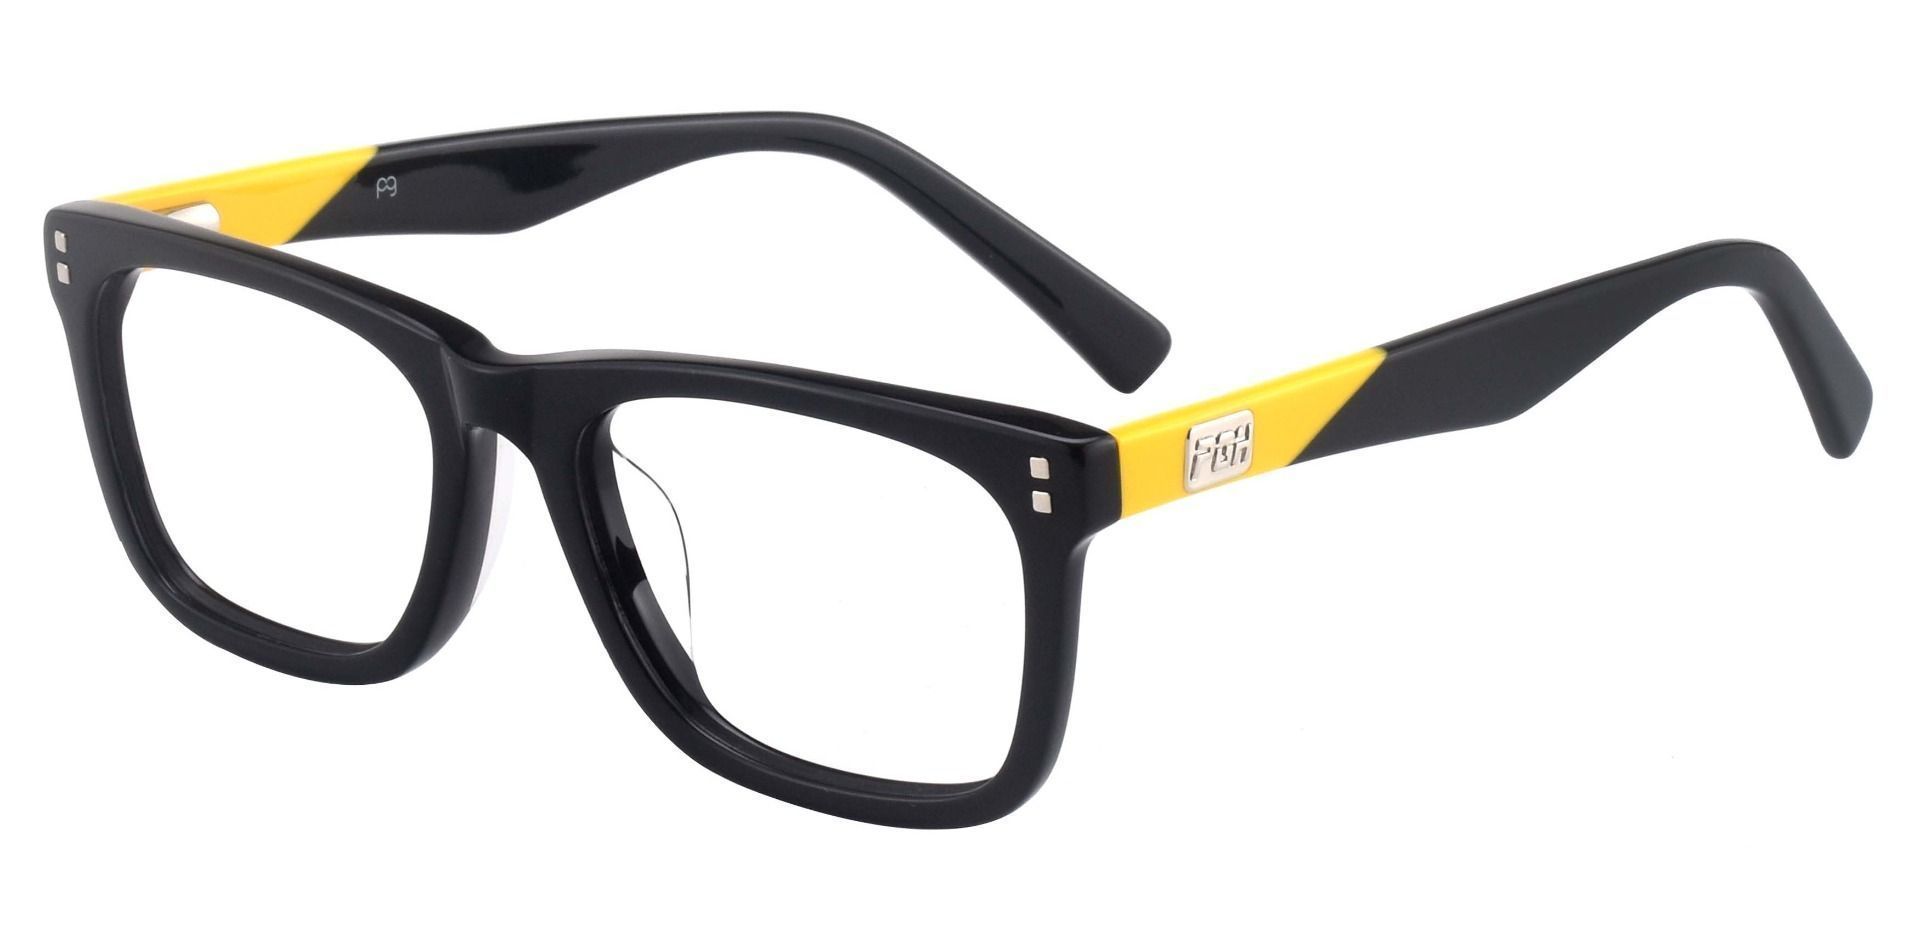 Blitz Rectangle Prescription Glasses - The Frame Is Black And Yellow